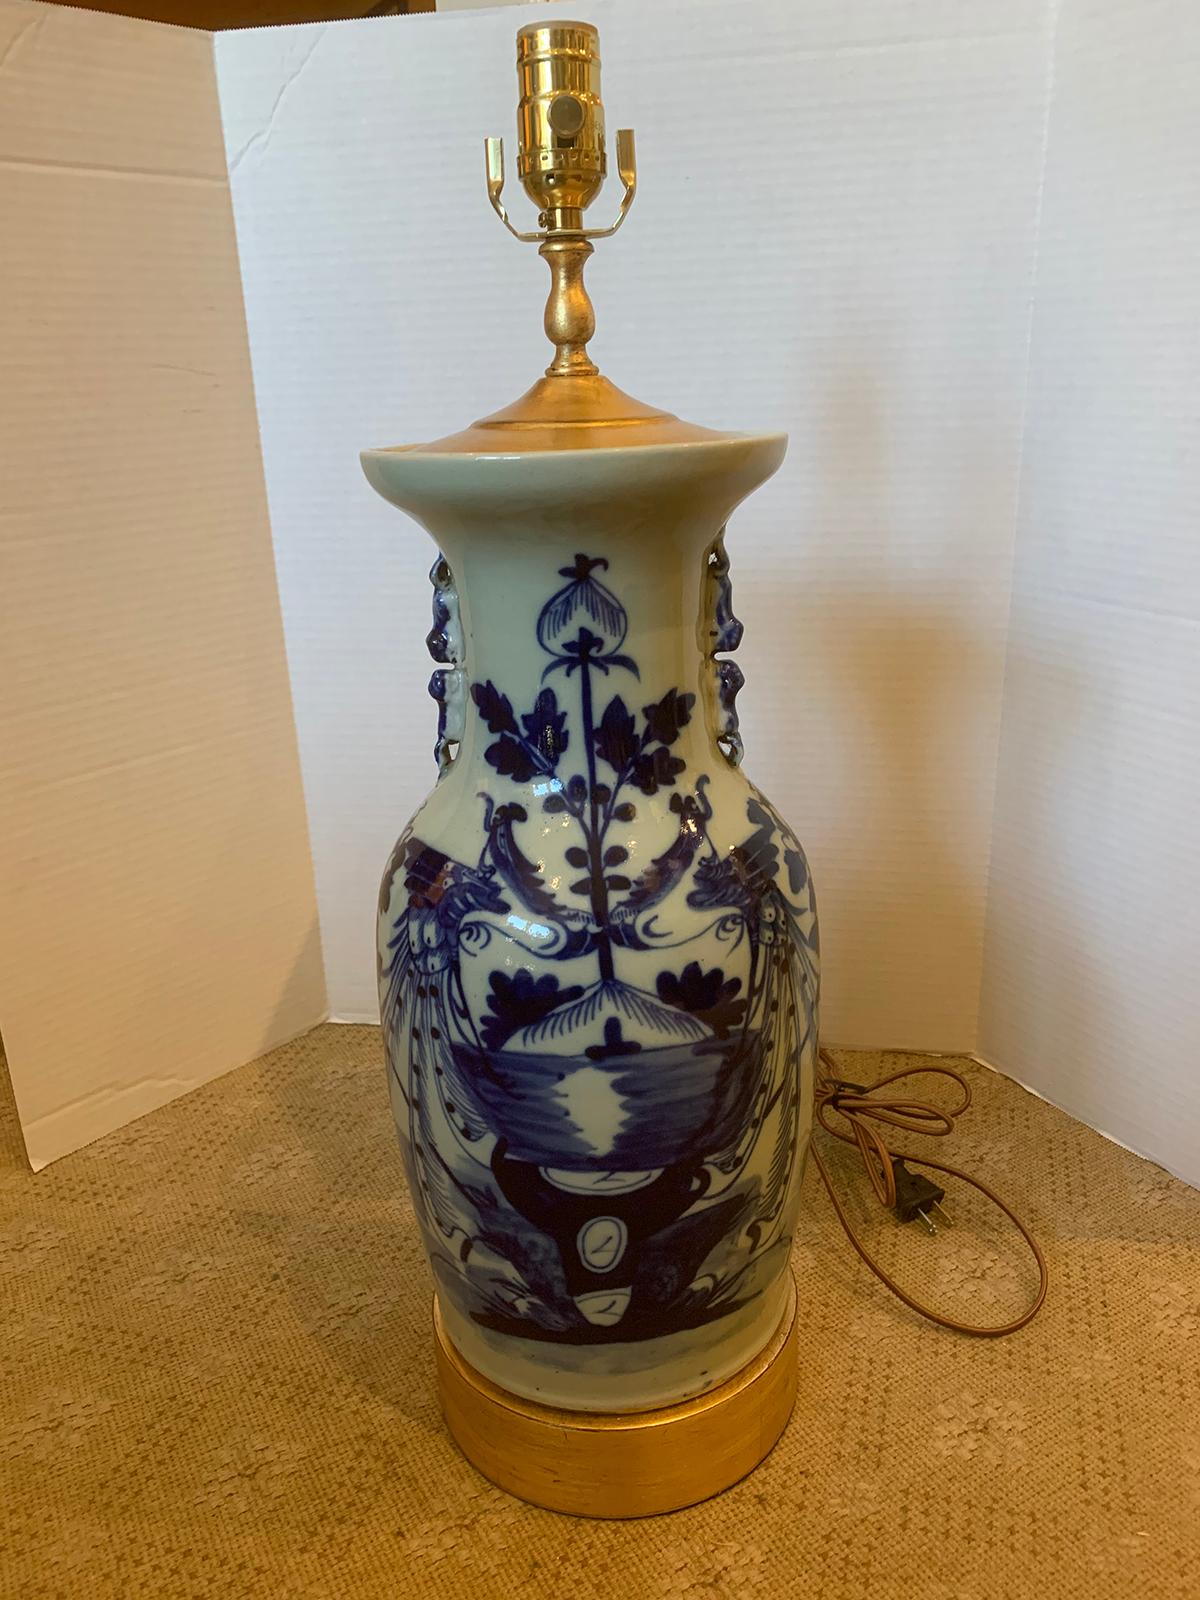 19th century Chinese blue and white porcelain lamp
New wiring.